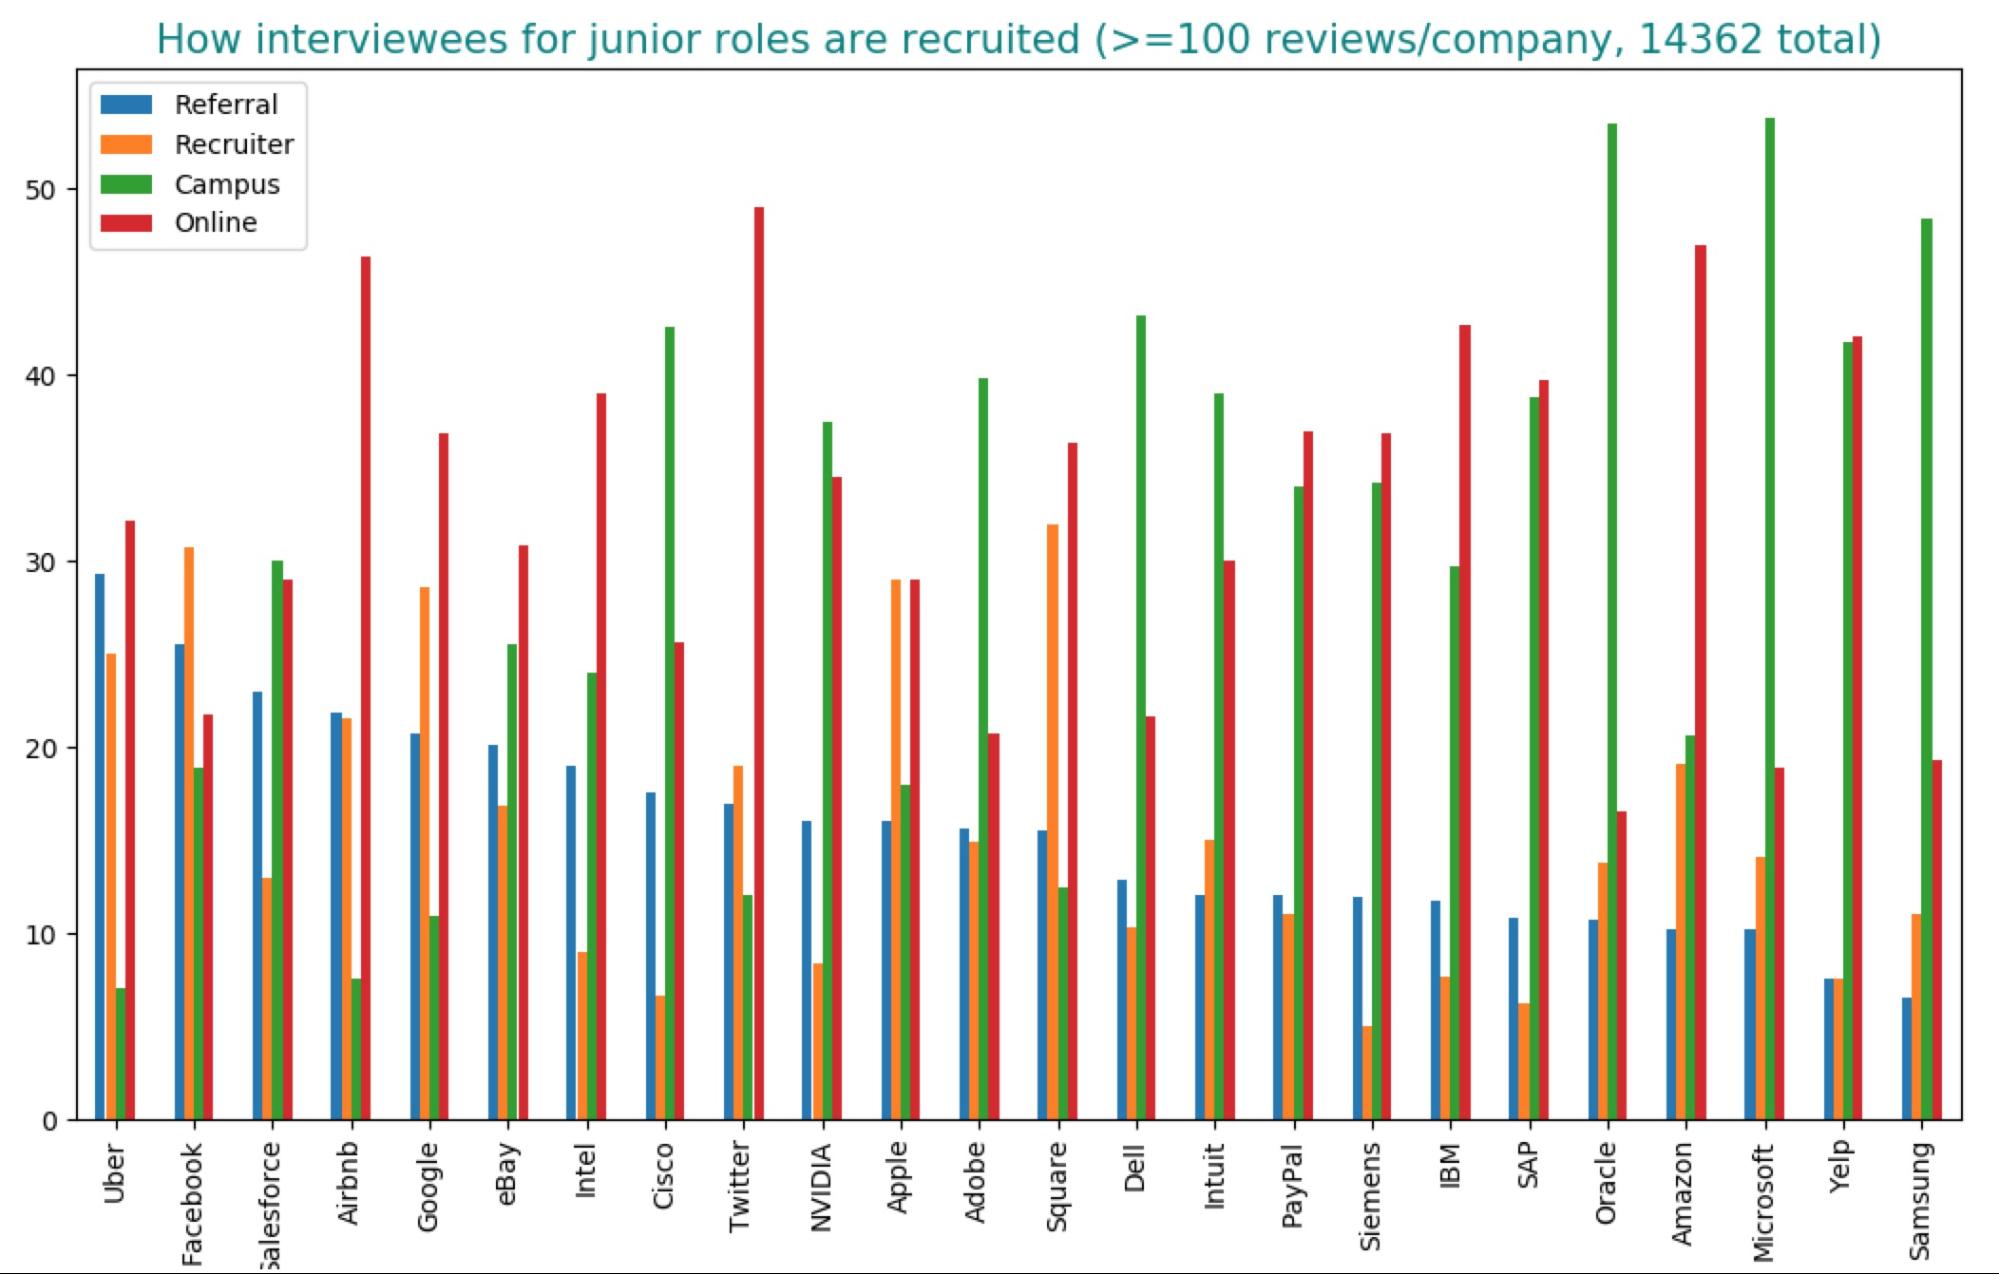 Most companies source junior candidates from campus